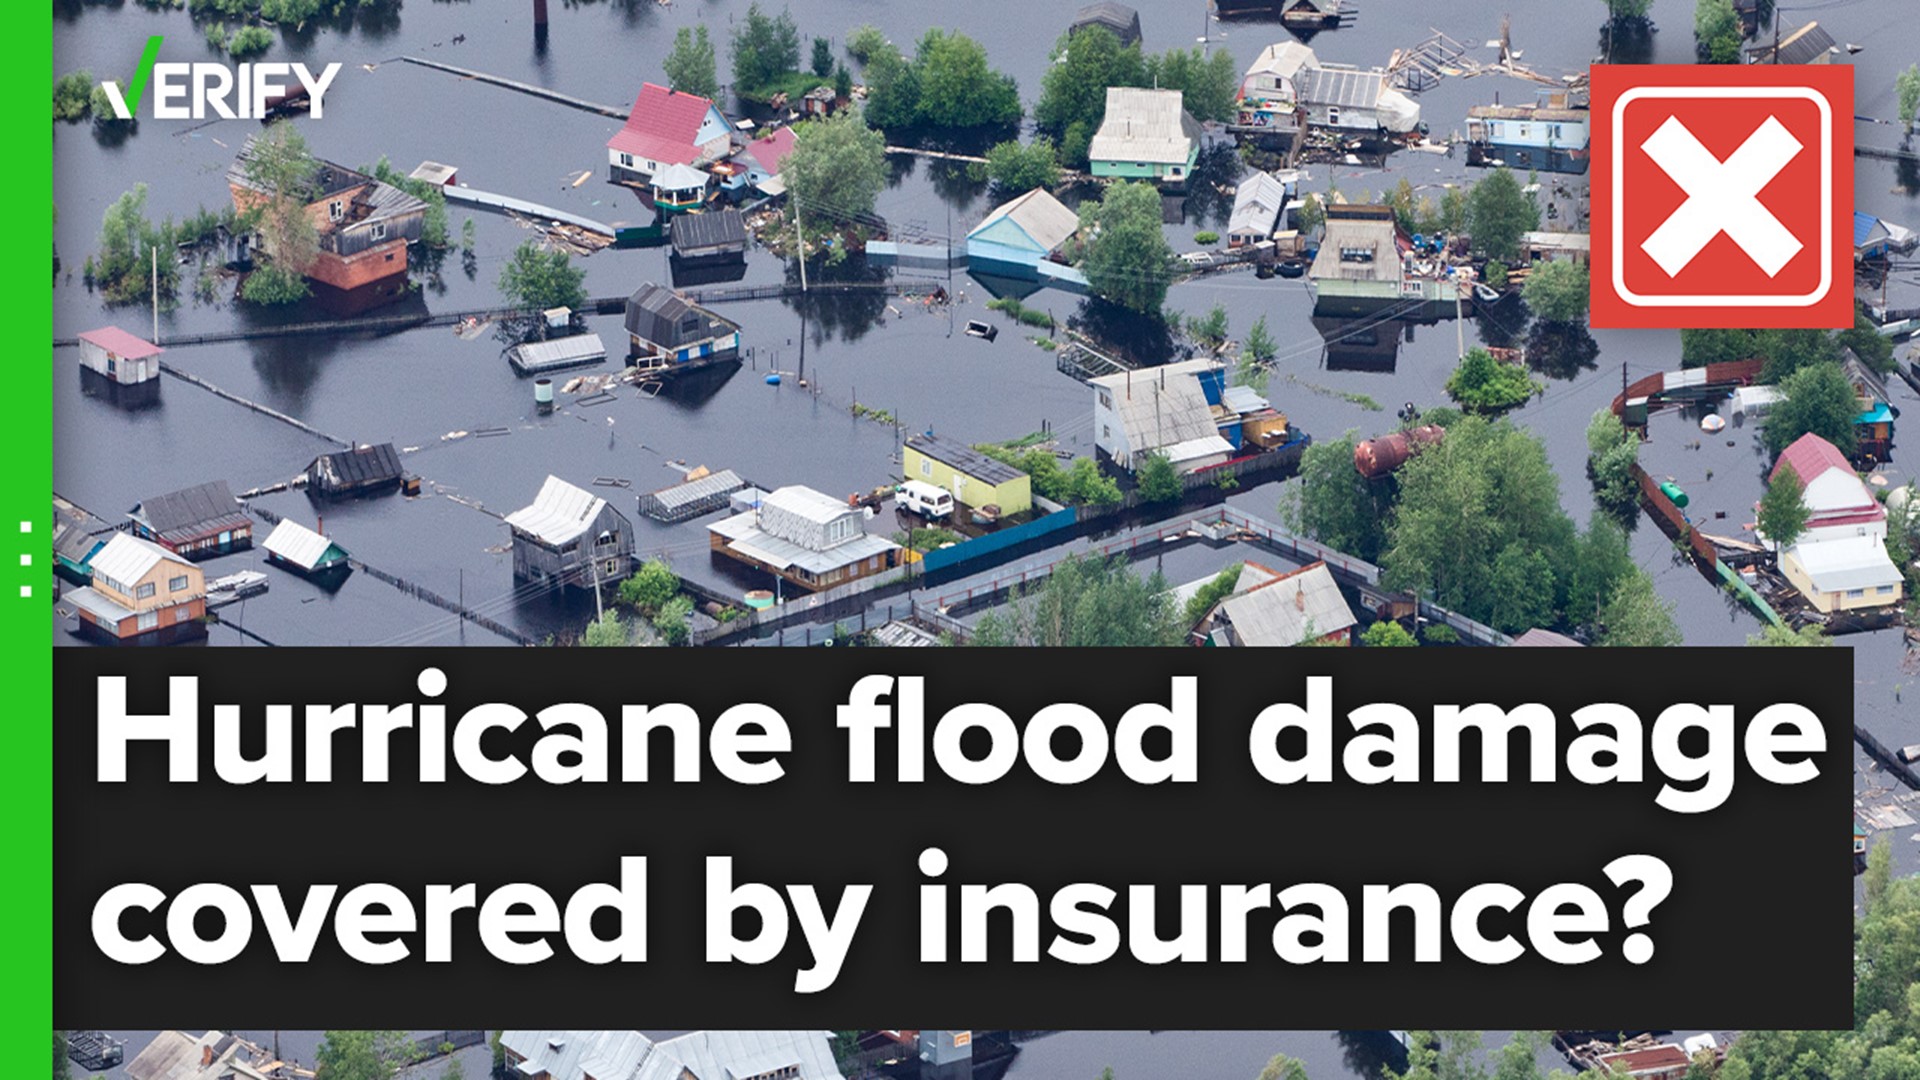 Separate flood insurance policies are available through private companies or a national program managed by FEMA.